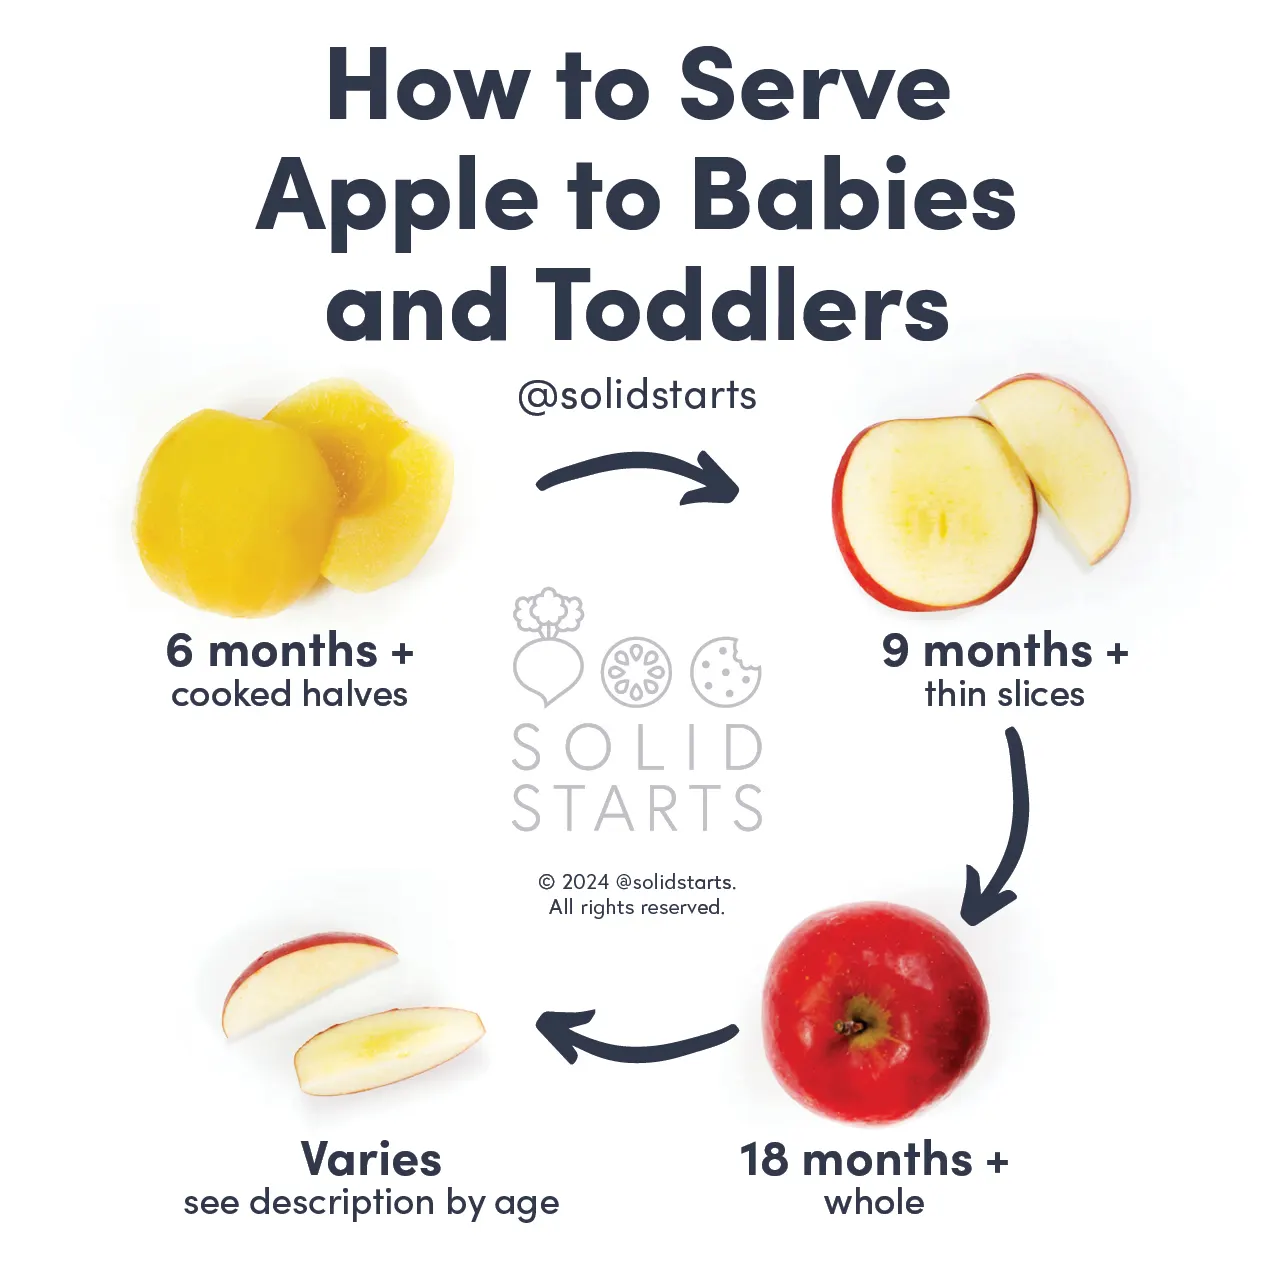 an infographic showing how to serve apple to babies and toddlers: cooked halves for 6 months+, thin slices for 9 months+, a whole raw apple for 18 months+, and raw and quartered for 24 months+